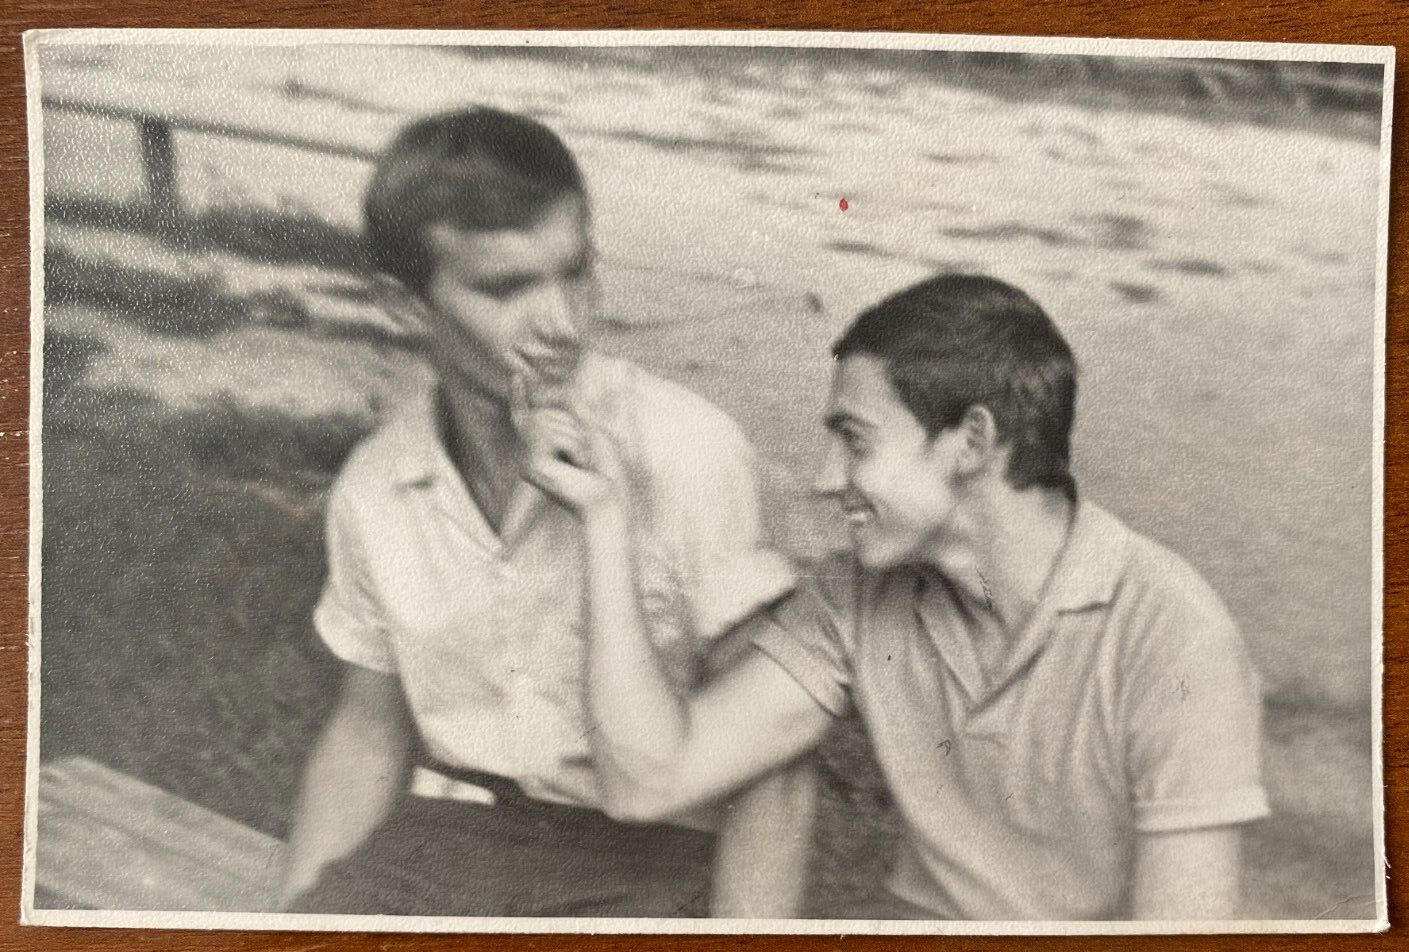 Affectionate gentle man strokes guy's face beautiful guys gay int Vintage photo